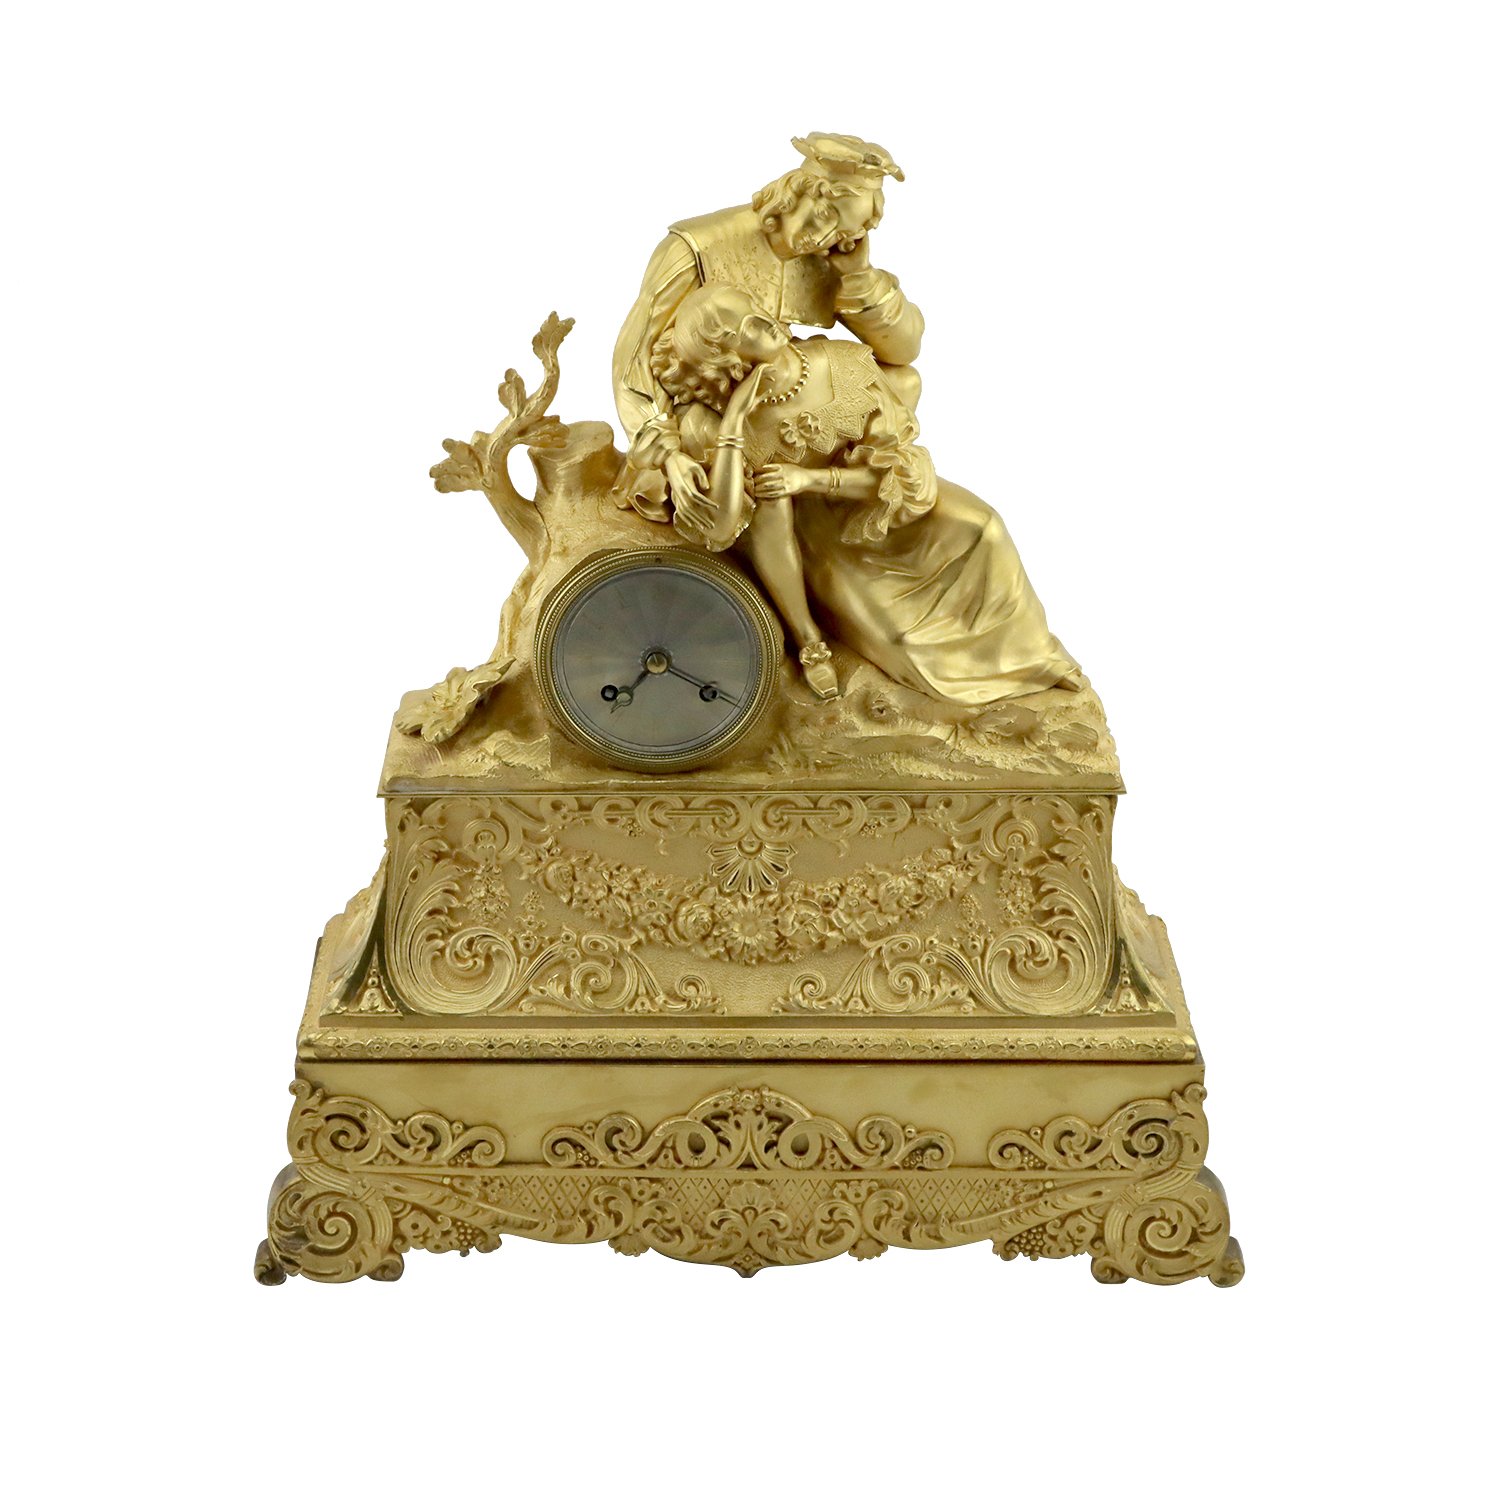 French Gilt Bronze Mantel Clock Depicting a Courting Couple, Circa 1830-40